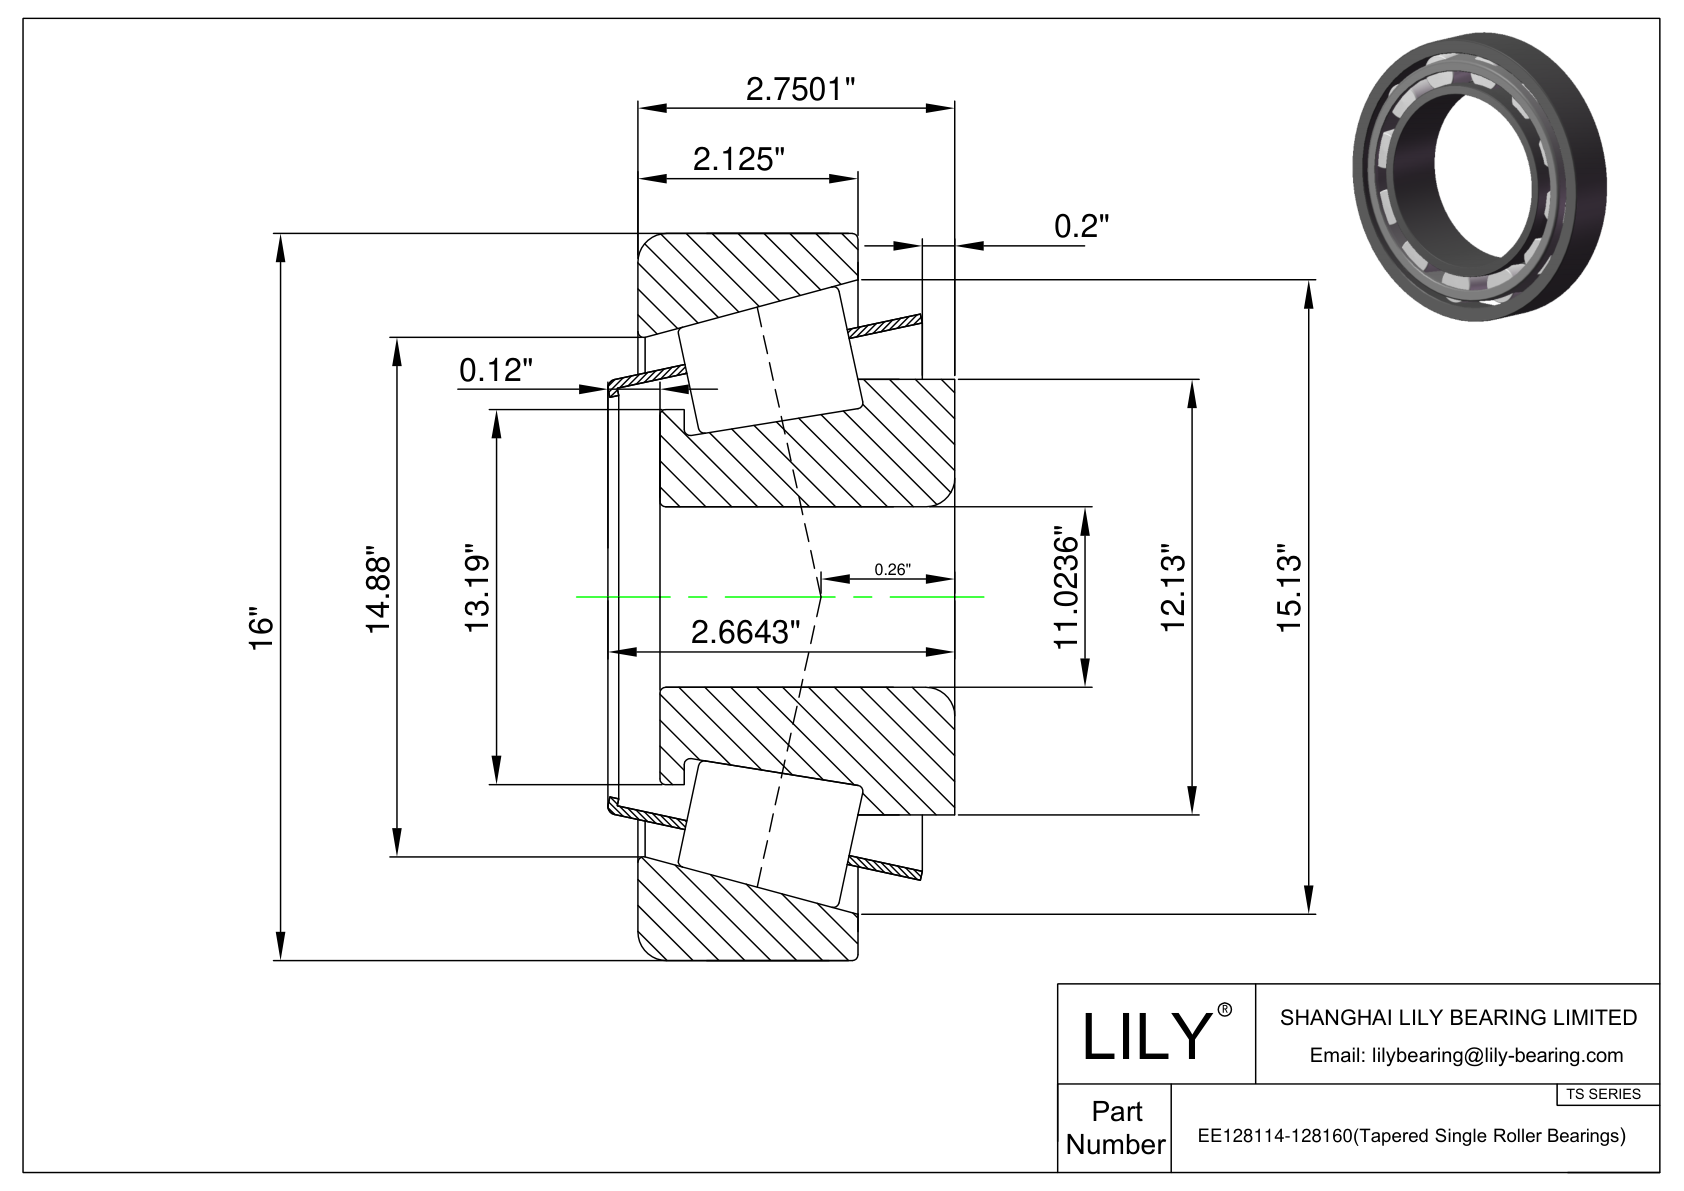 EE128114-128160 TS (Tapered Single Roller Bearings) (Imperial) cad drawing